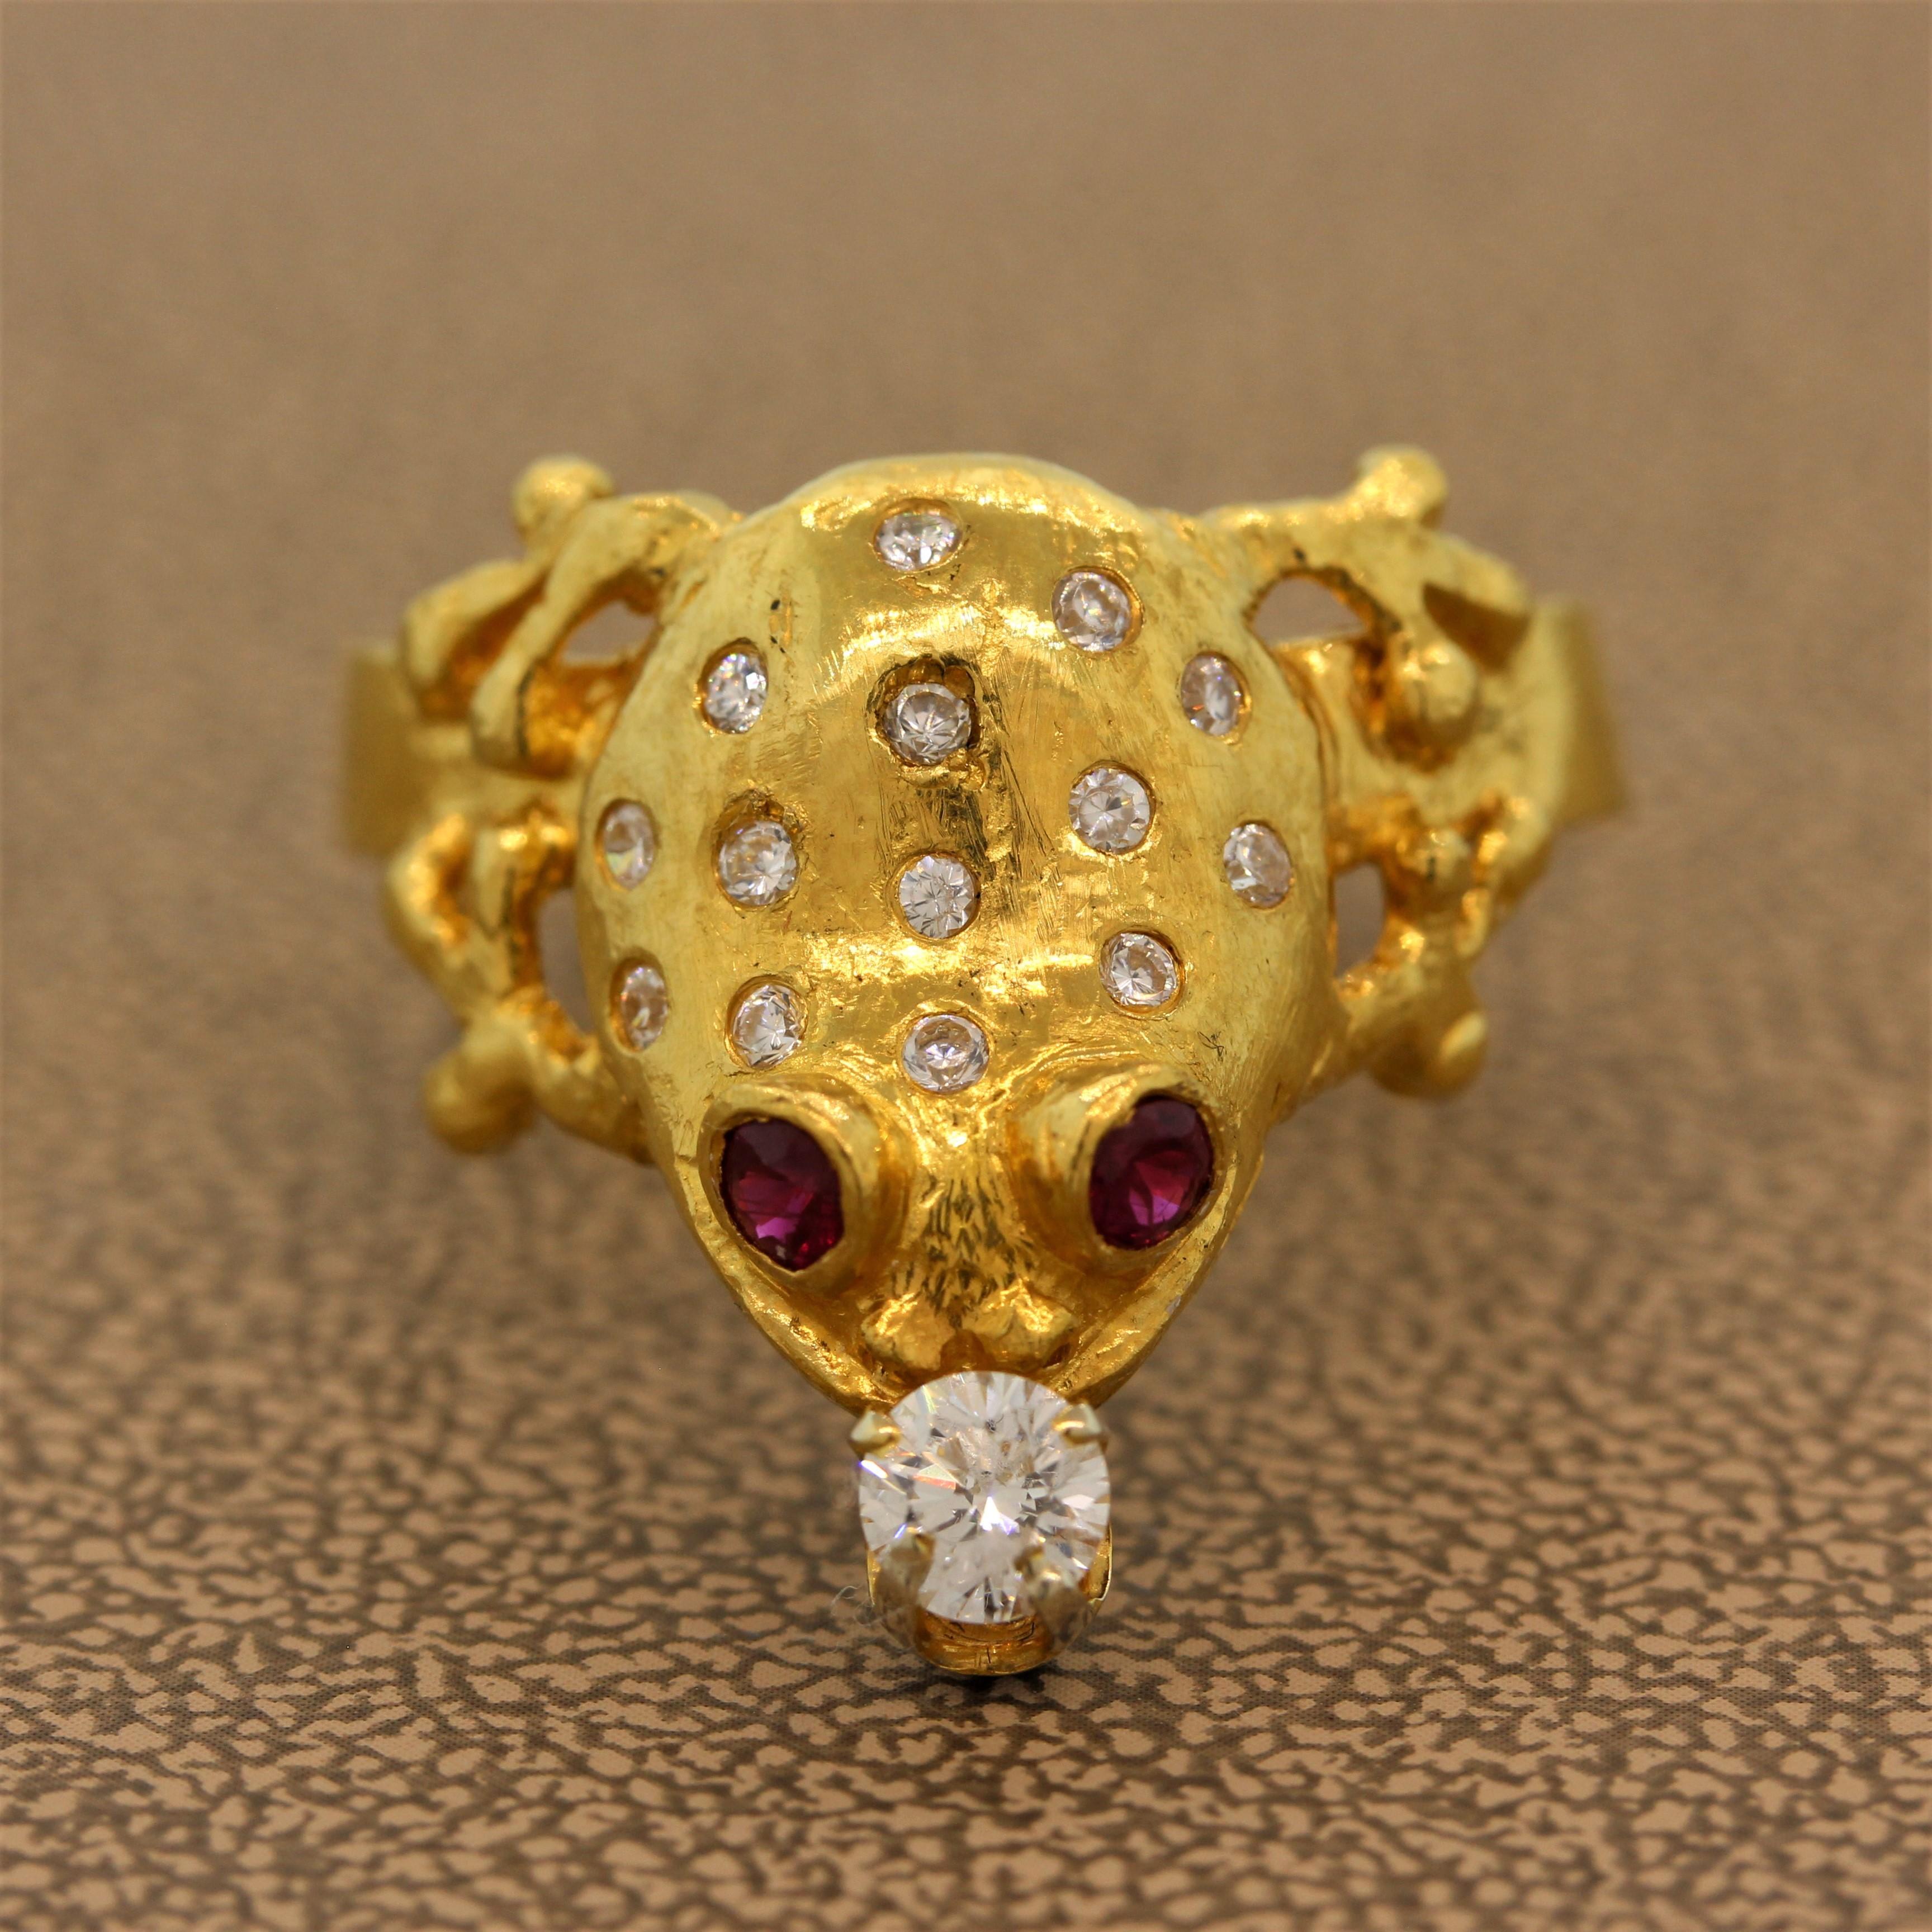 Ribbit Ribbit! This leaping frog may not turn into prince charming with a kiss but he can surely enchant anyone with his bezel set ruby eyes and diamond studded body set in 22K yellow gold. This ring will definitely bring luck and fortune to your